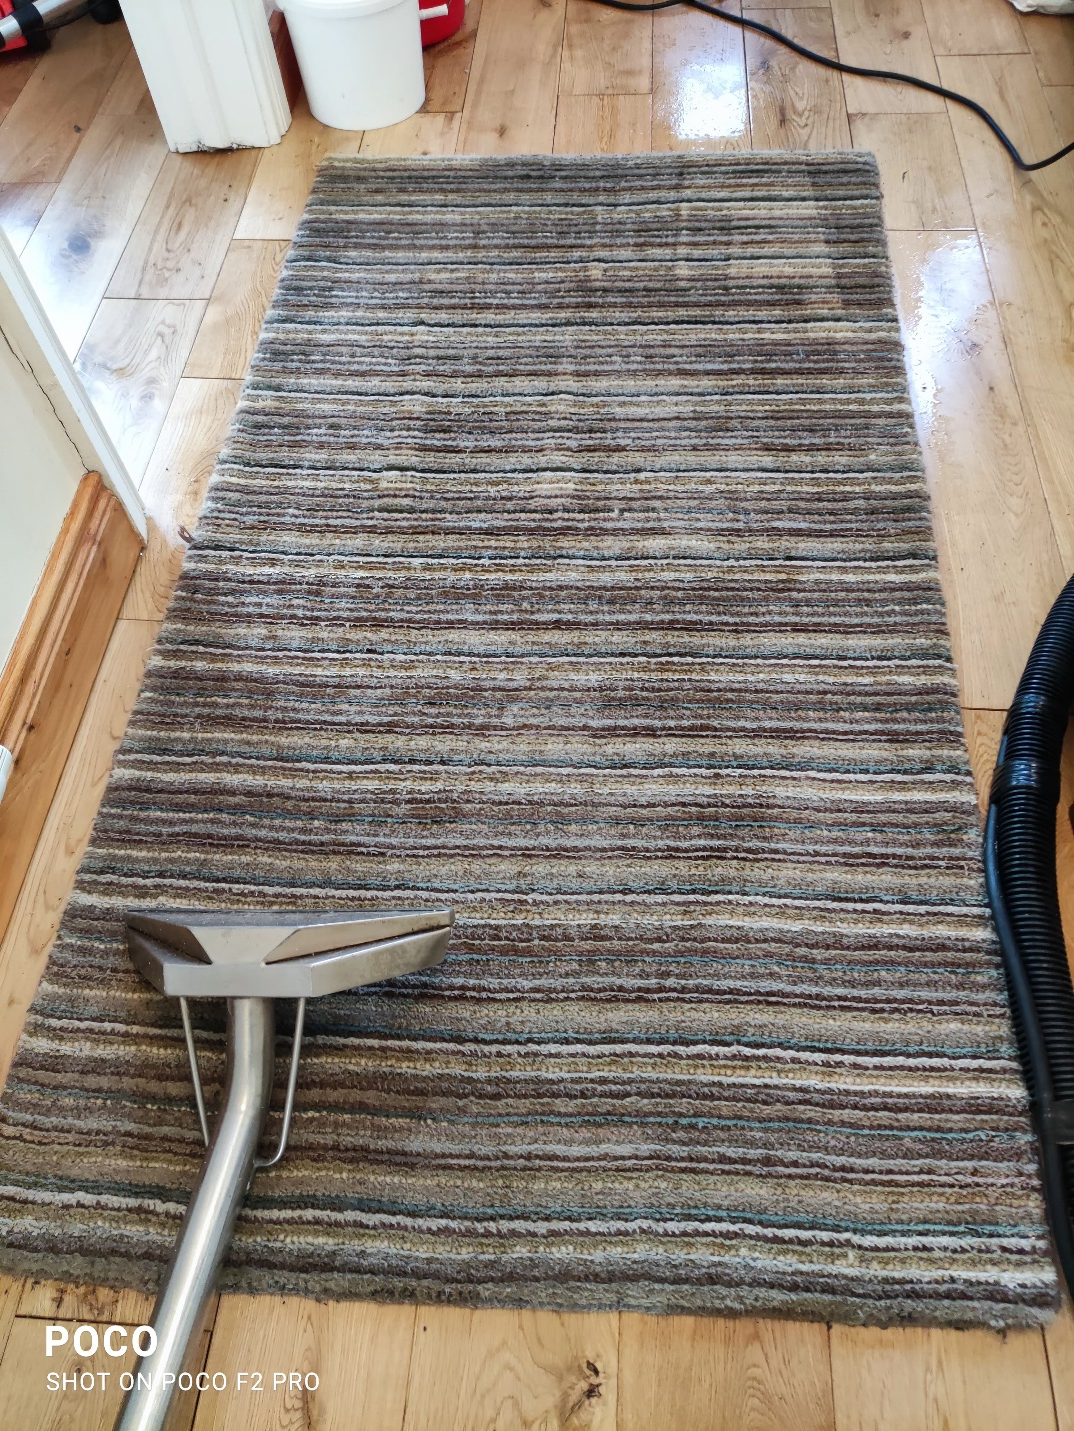 Hotel carpet cleaning in Dublin | Hotel carpet cleaning service in Dublin